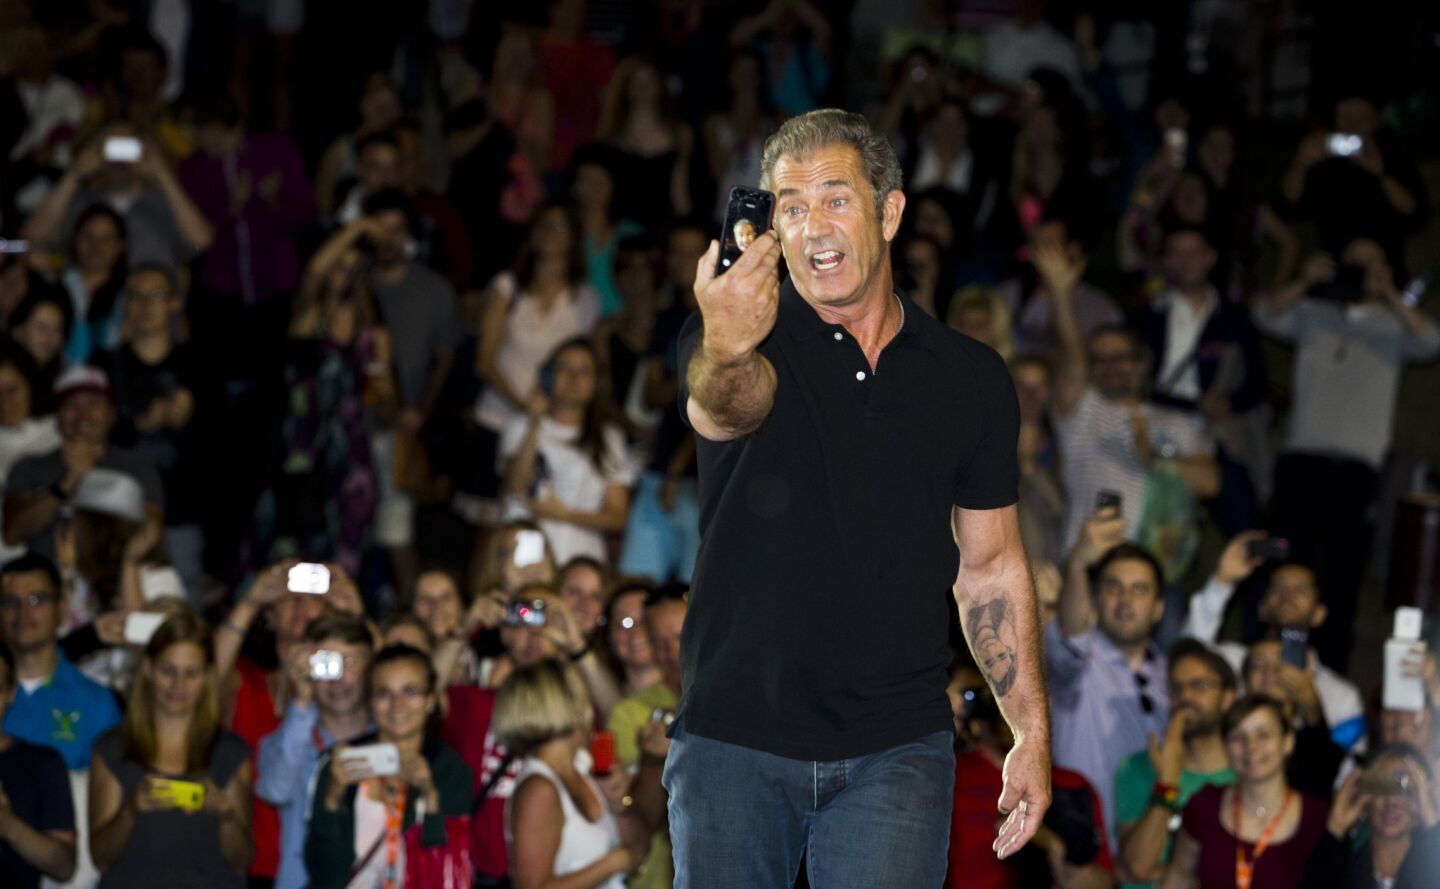 Actor Mel Gibson takes a selfie at an outdoor screening of "Mad Max" during the 49th Karlovy Vary International Film Festival on July 4, 2014, in Karlovy Vary, Czech Republic.